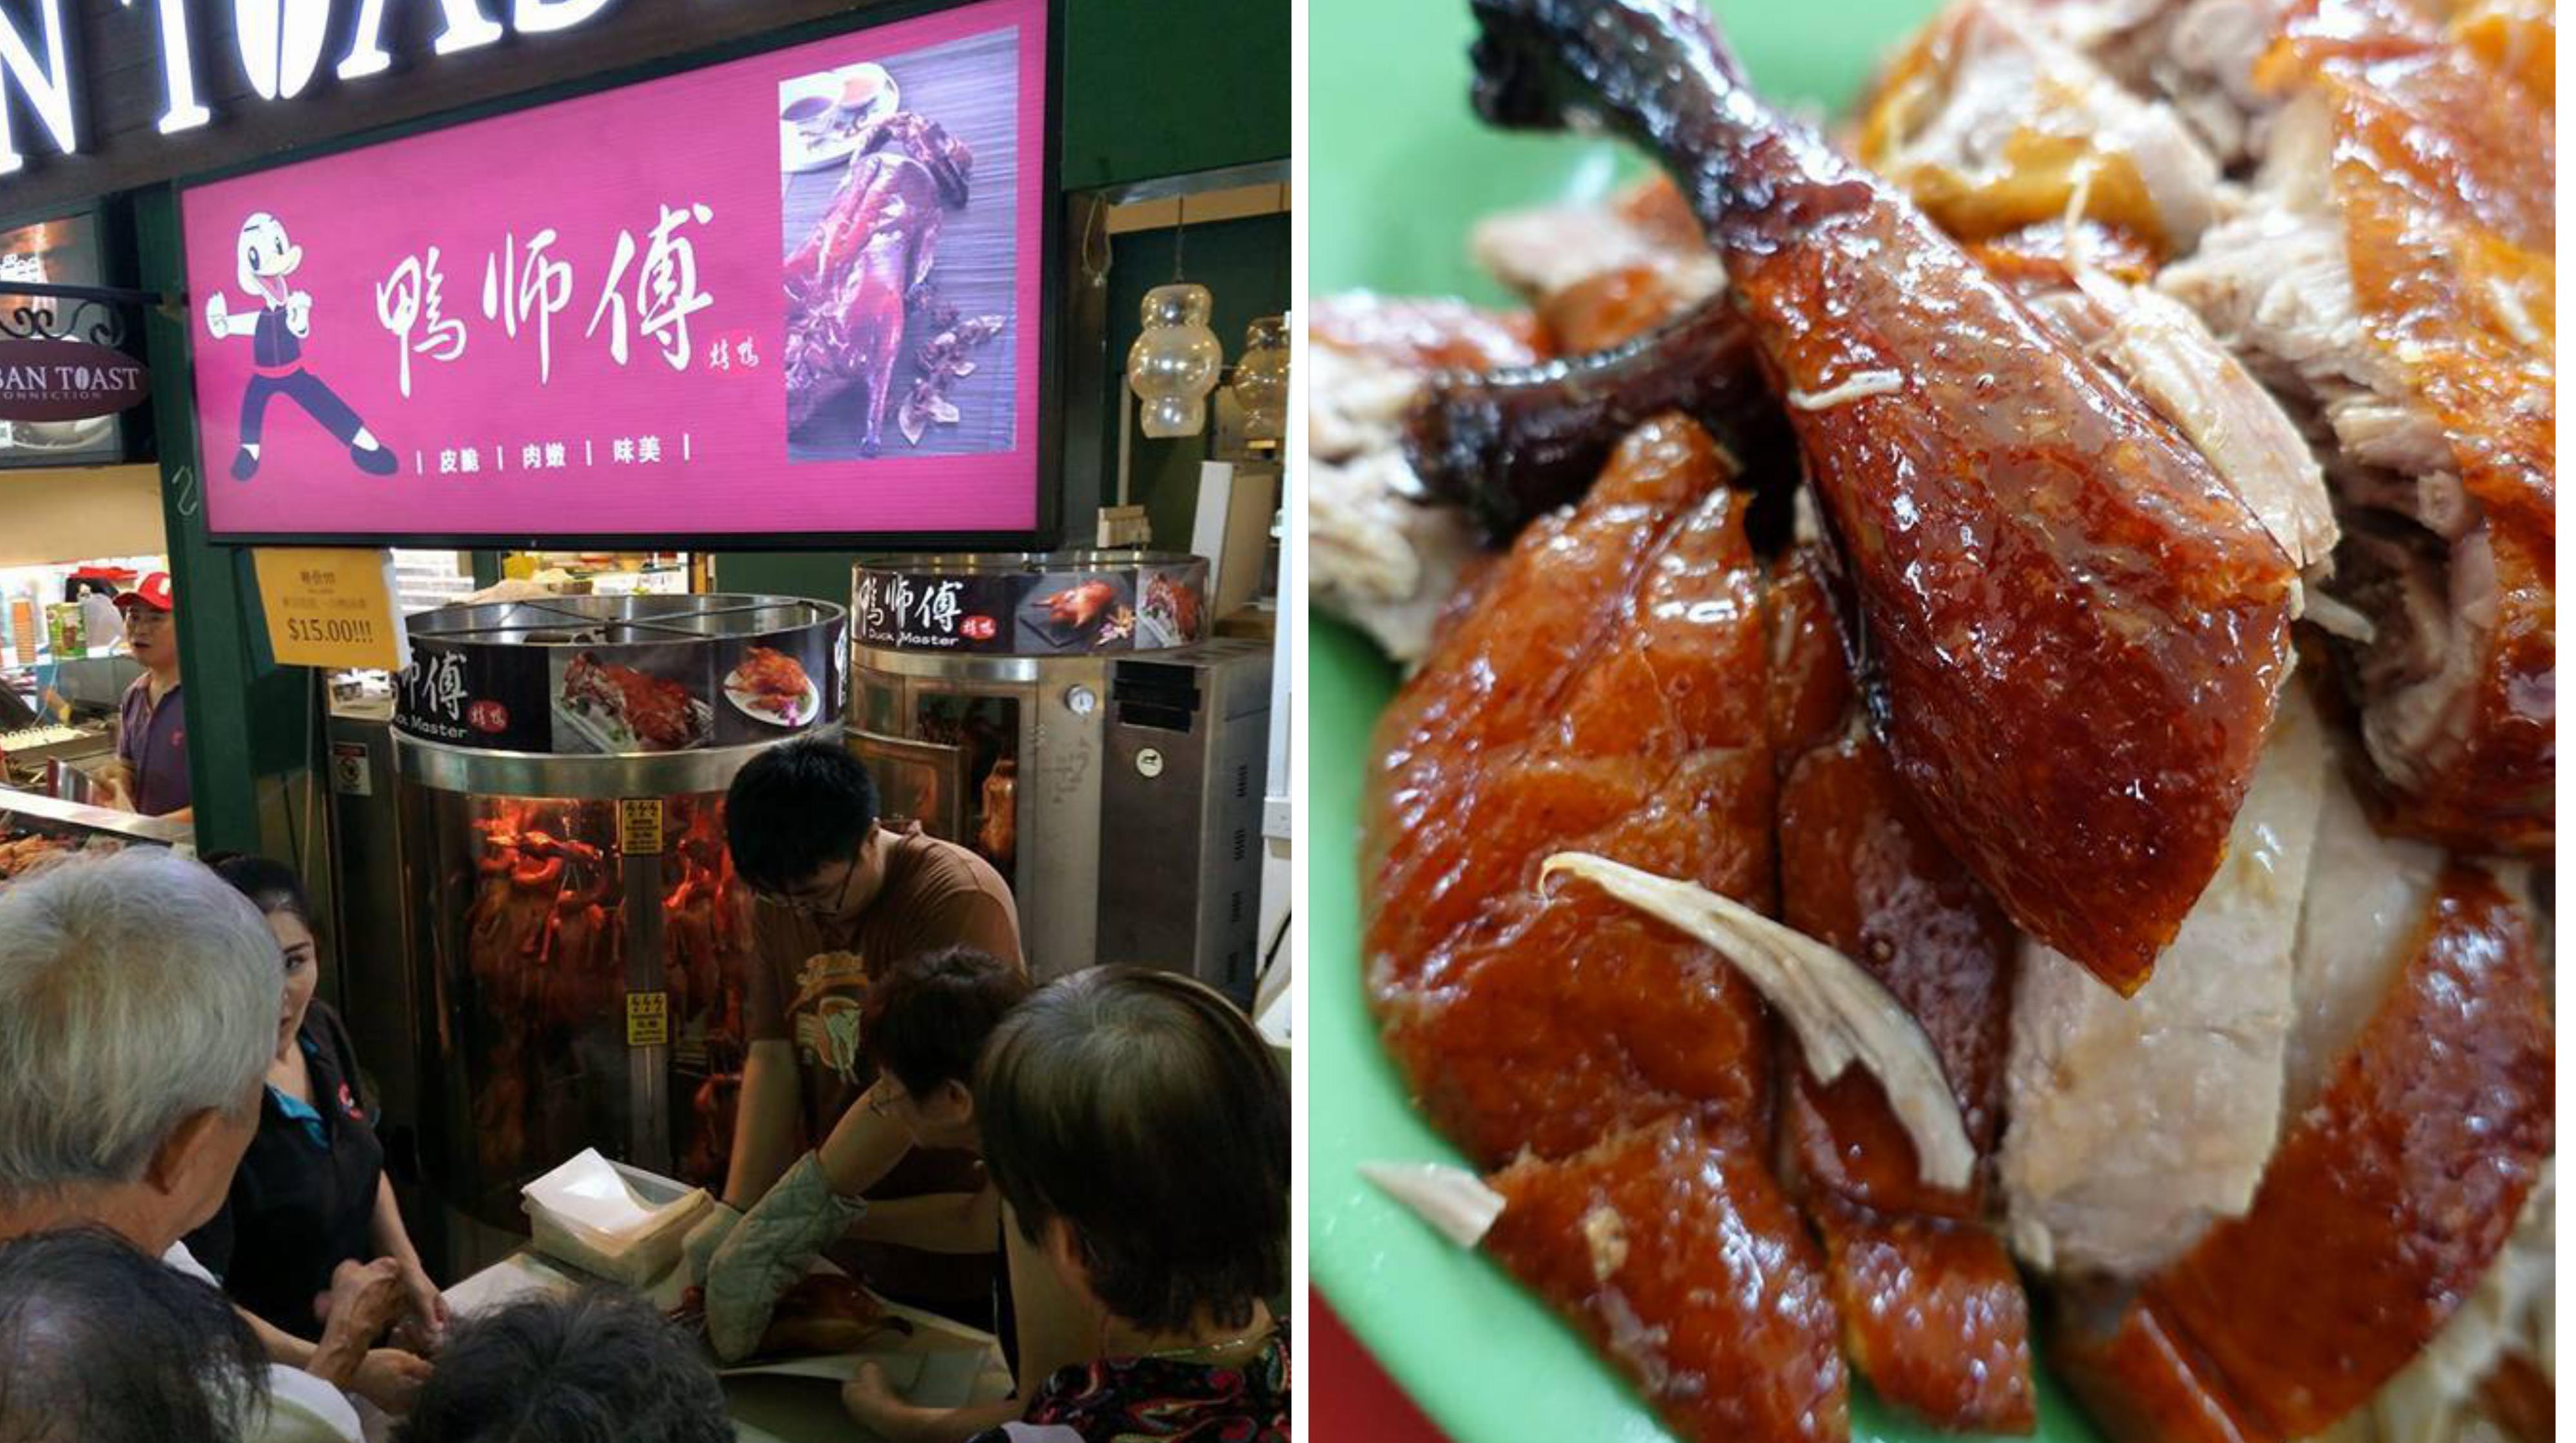 Chinatown stall sells whole ducks roasted on the spot for S$15 each